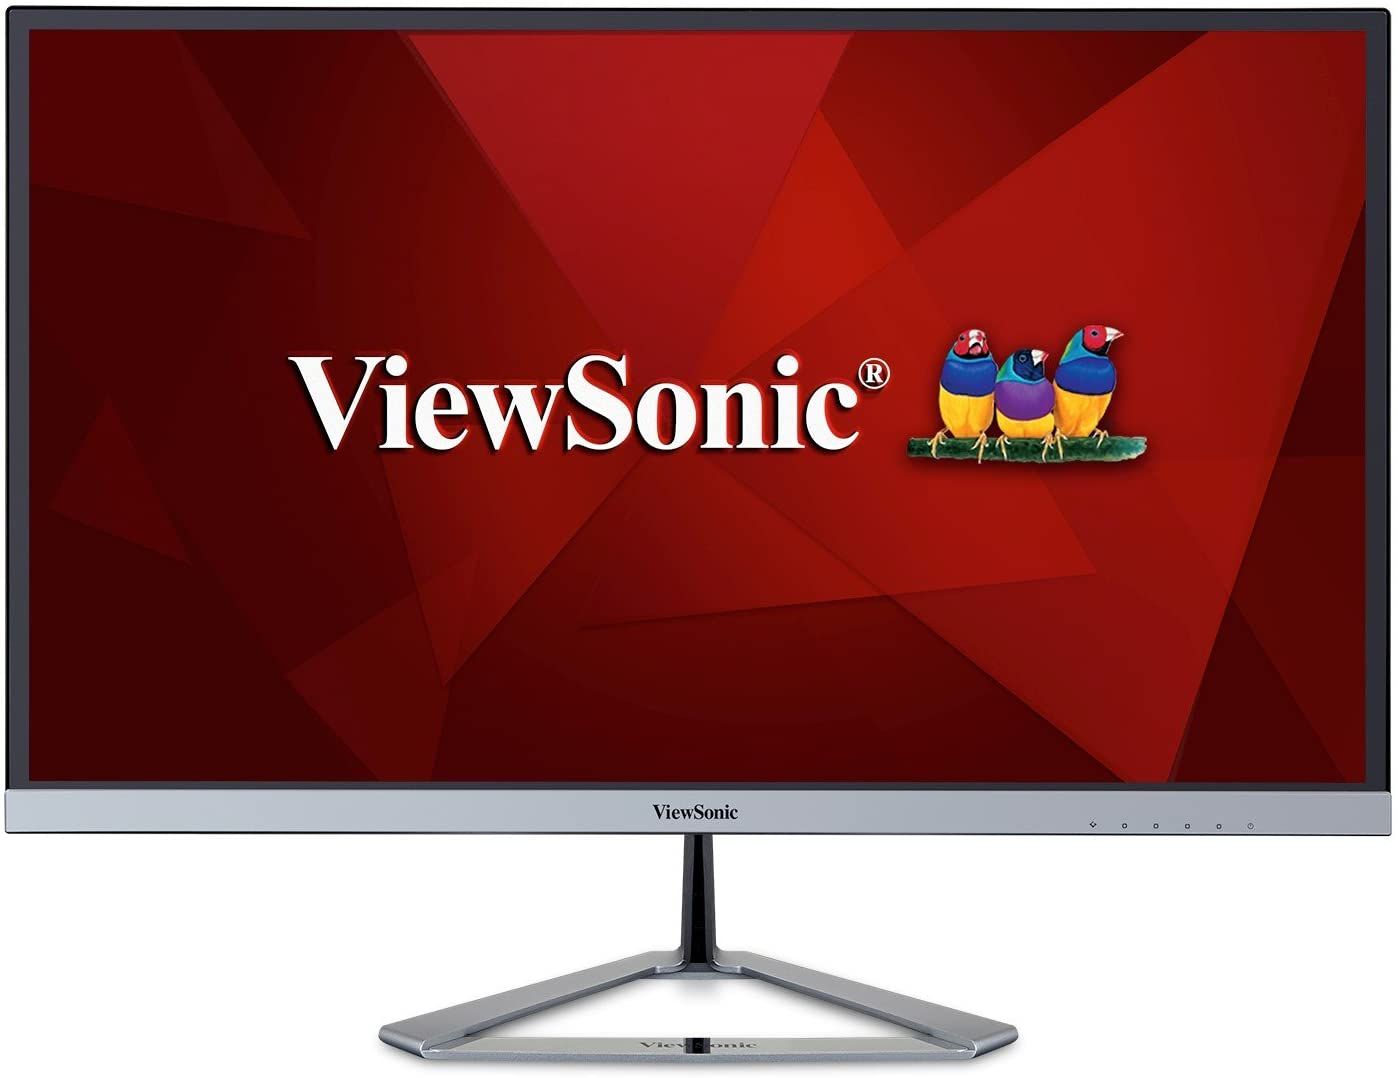 ViewSonic VX2776-SMHD - best monitor for watching movies